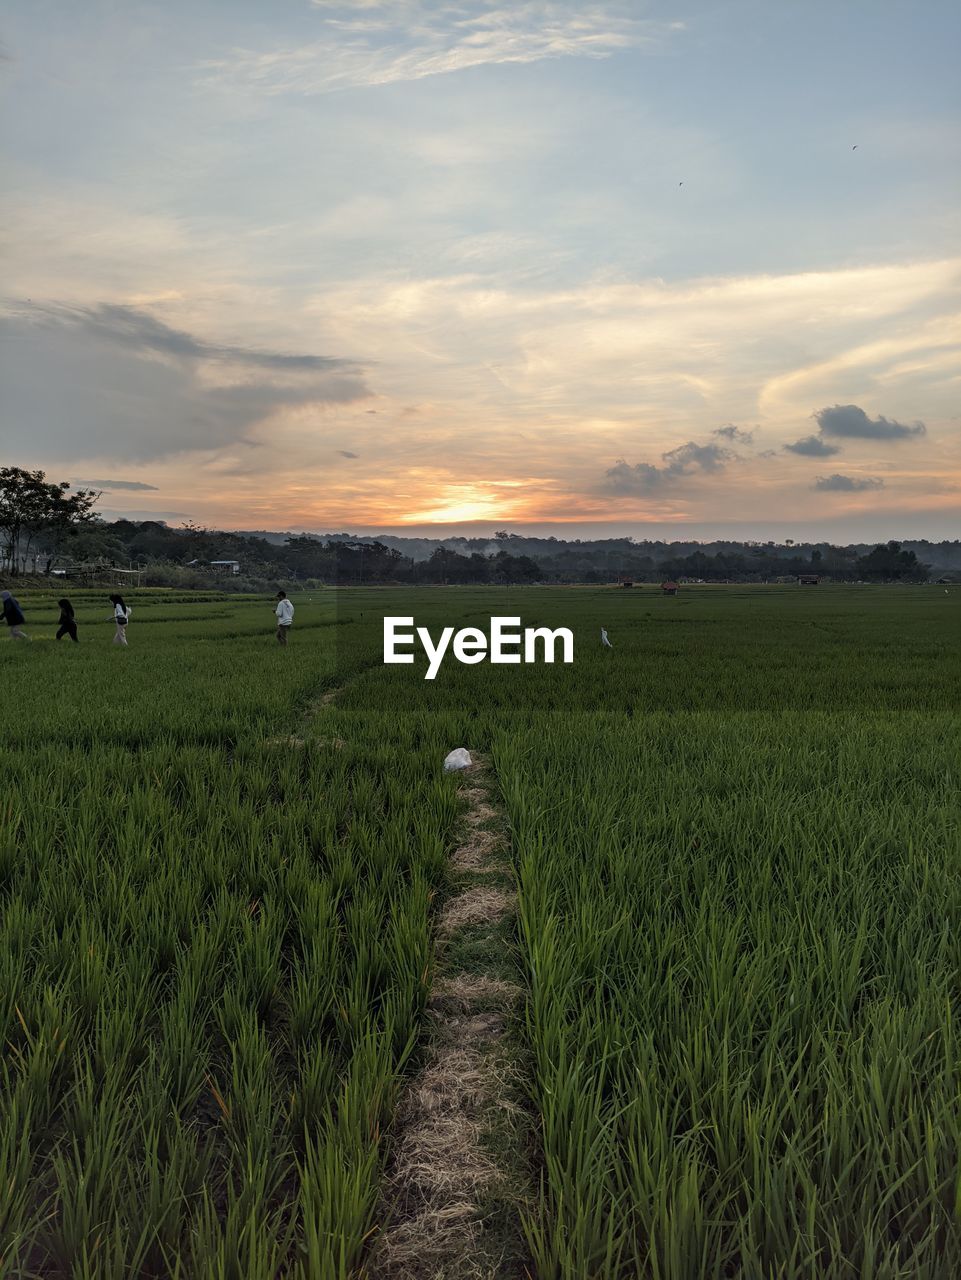 landscape, sky, field, plant, environment, land, agriculture, rural scene, horizon, grass, scenics - nature, beauty in nature, nature, cloud, crop, sunset, growth, tranquility, prairie, farm, plain, tranquil scene, rural area, green, grassland, paddy field, cereal plant, sunlight, natural environment, no people, meadow, outdoors, food, idyllic, hill, barley, rice, tree, food and drink, non-urban scene, rice paddy